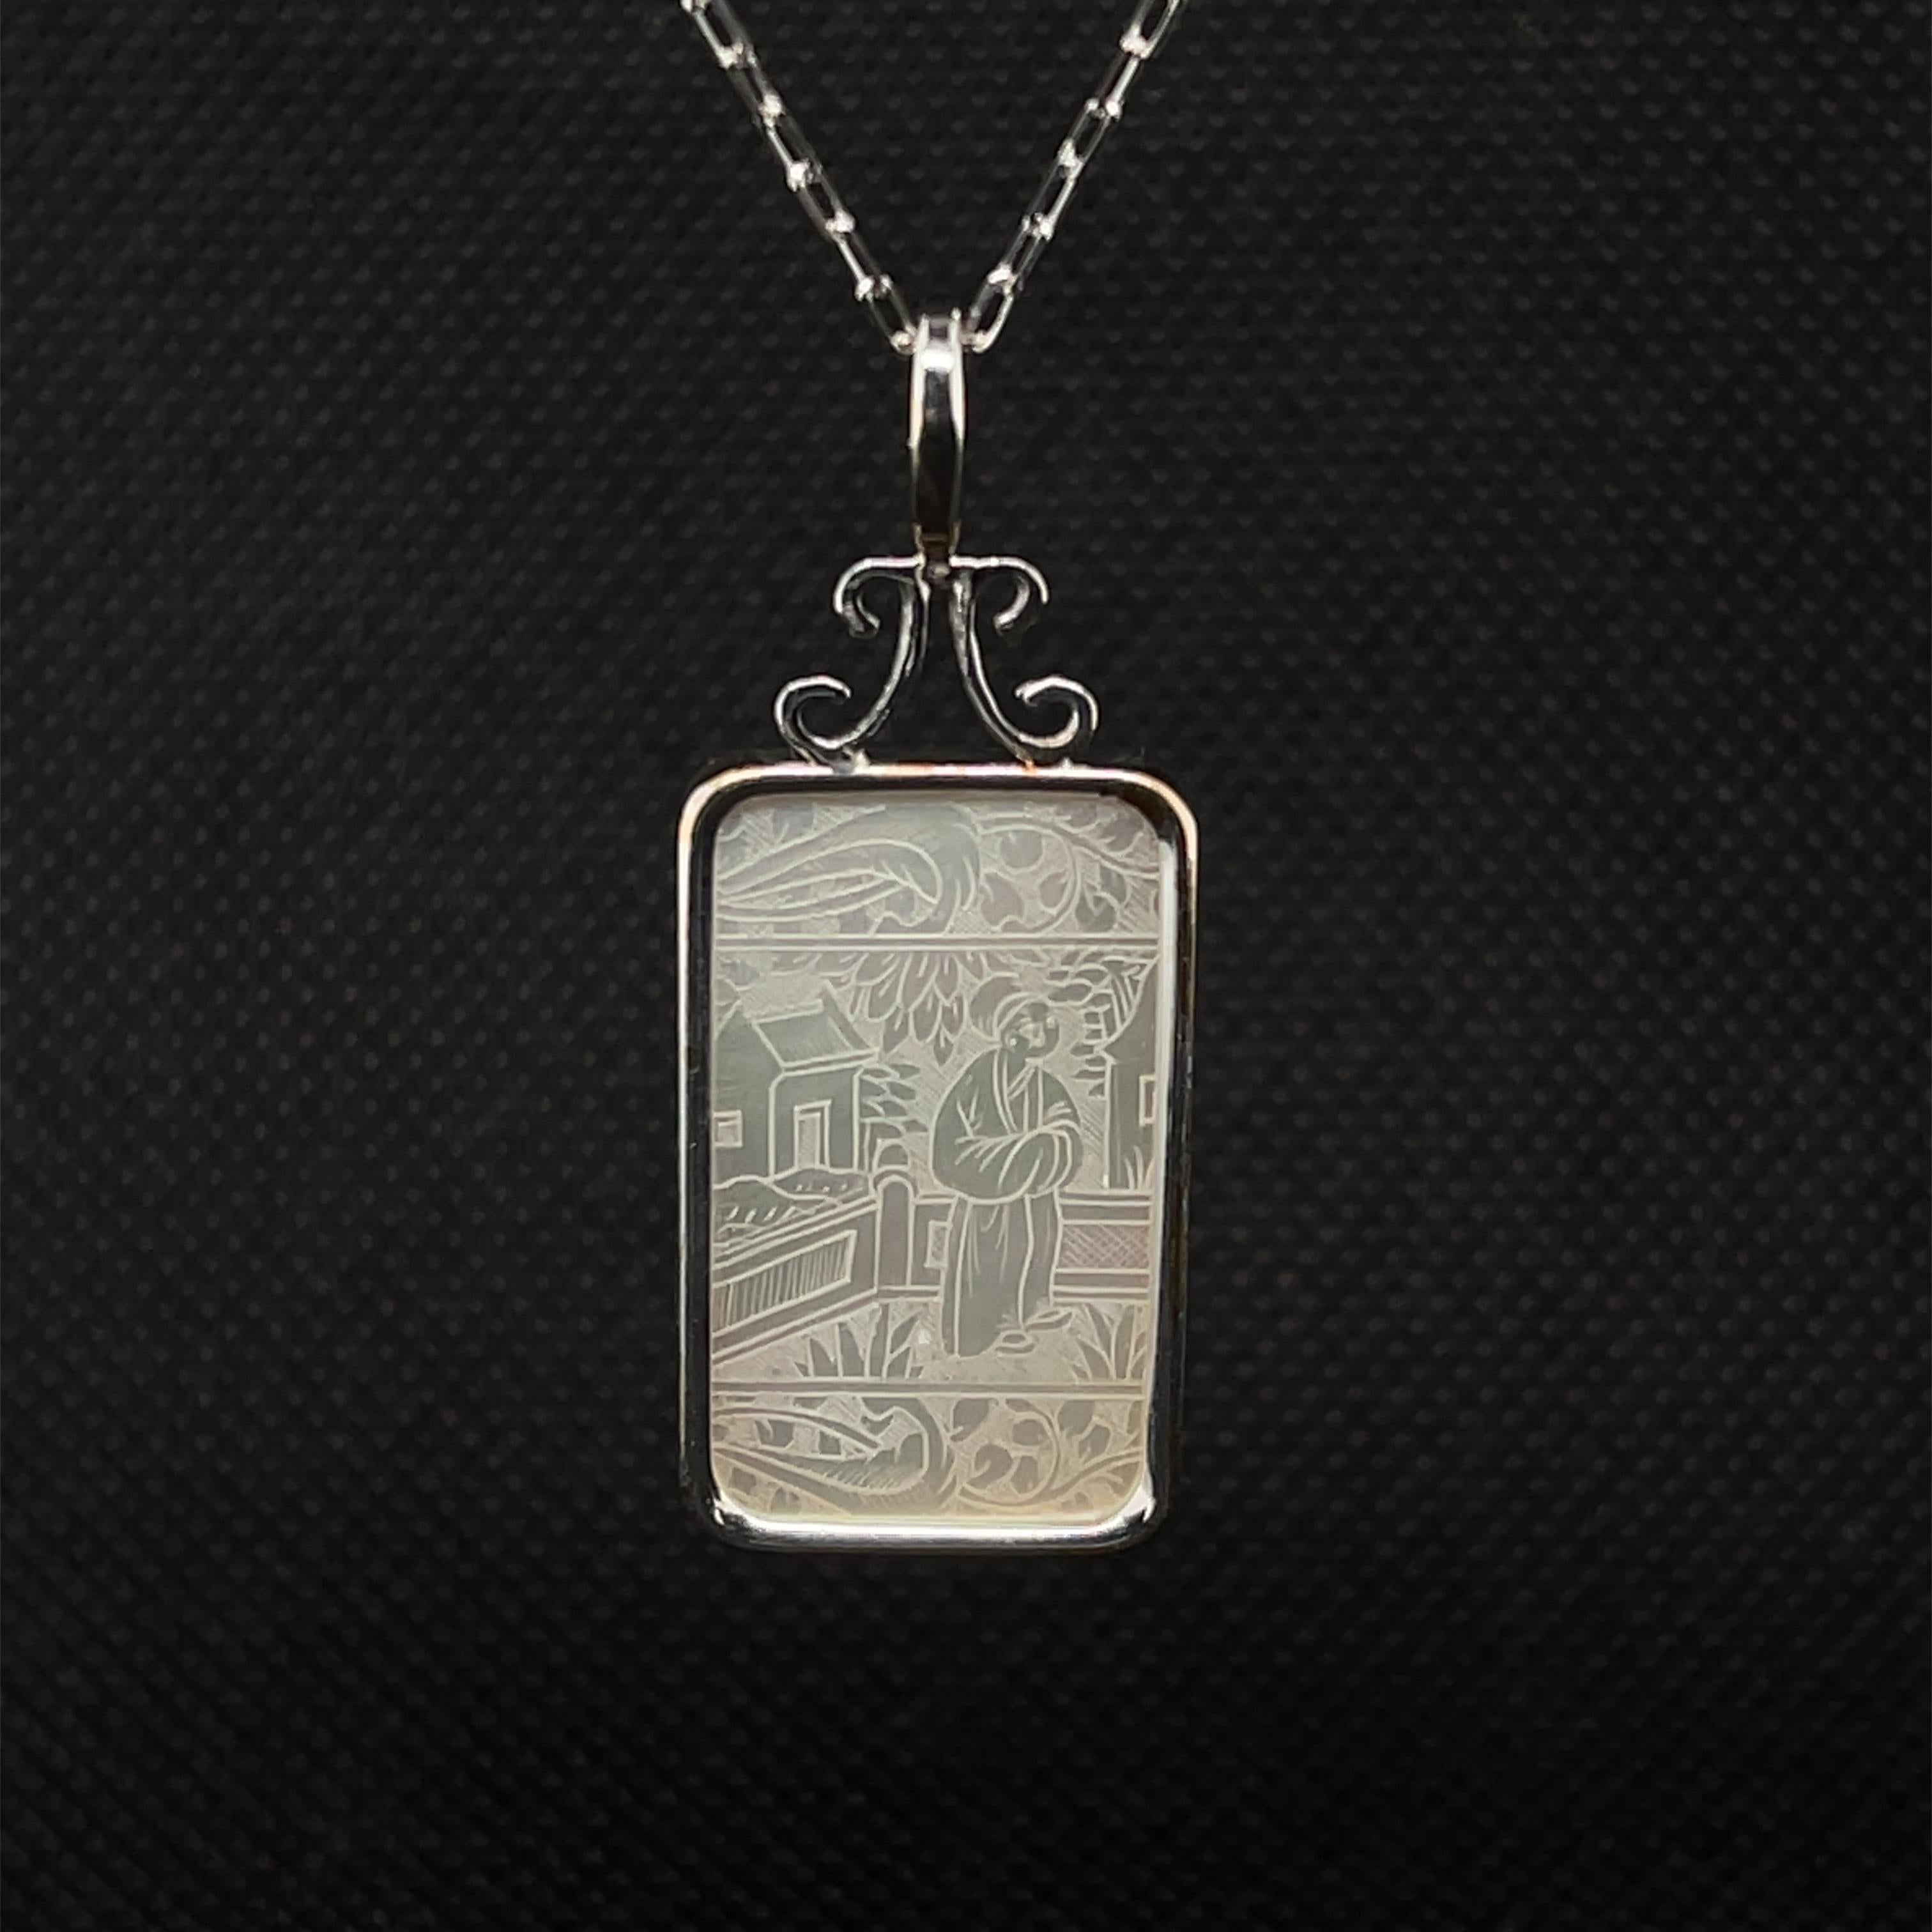 This pretty pendant / enhancer features an antique mother-of-pearl gaming counter that has been bezel set in 14k white gold. Gaming counters, or 